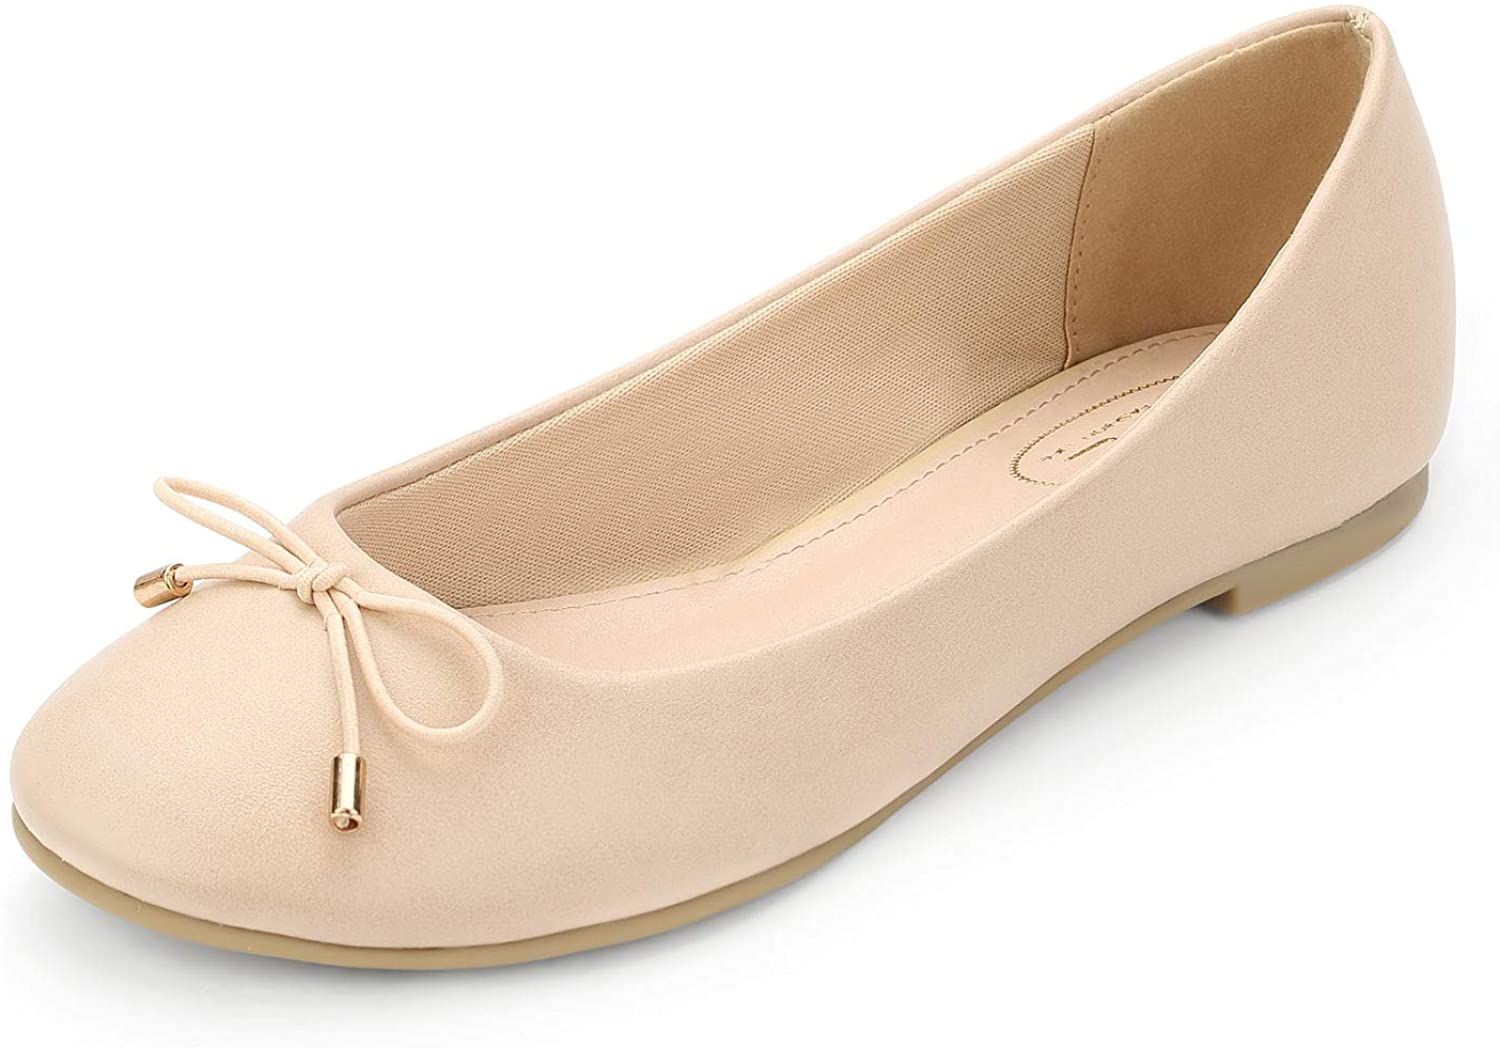 WFL Round Toe Women Flats Slip on Ballet Flats Shoes Soft 